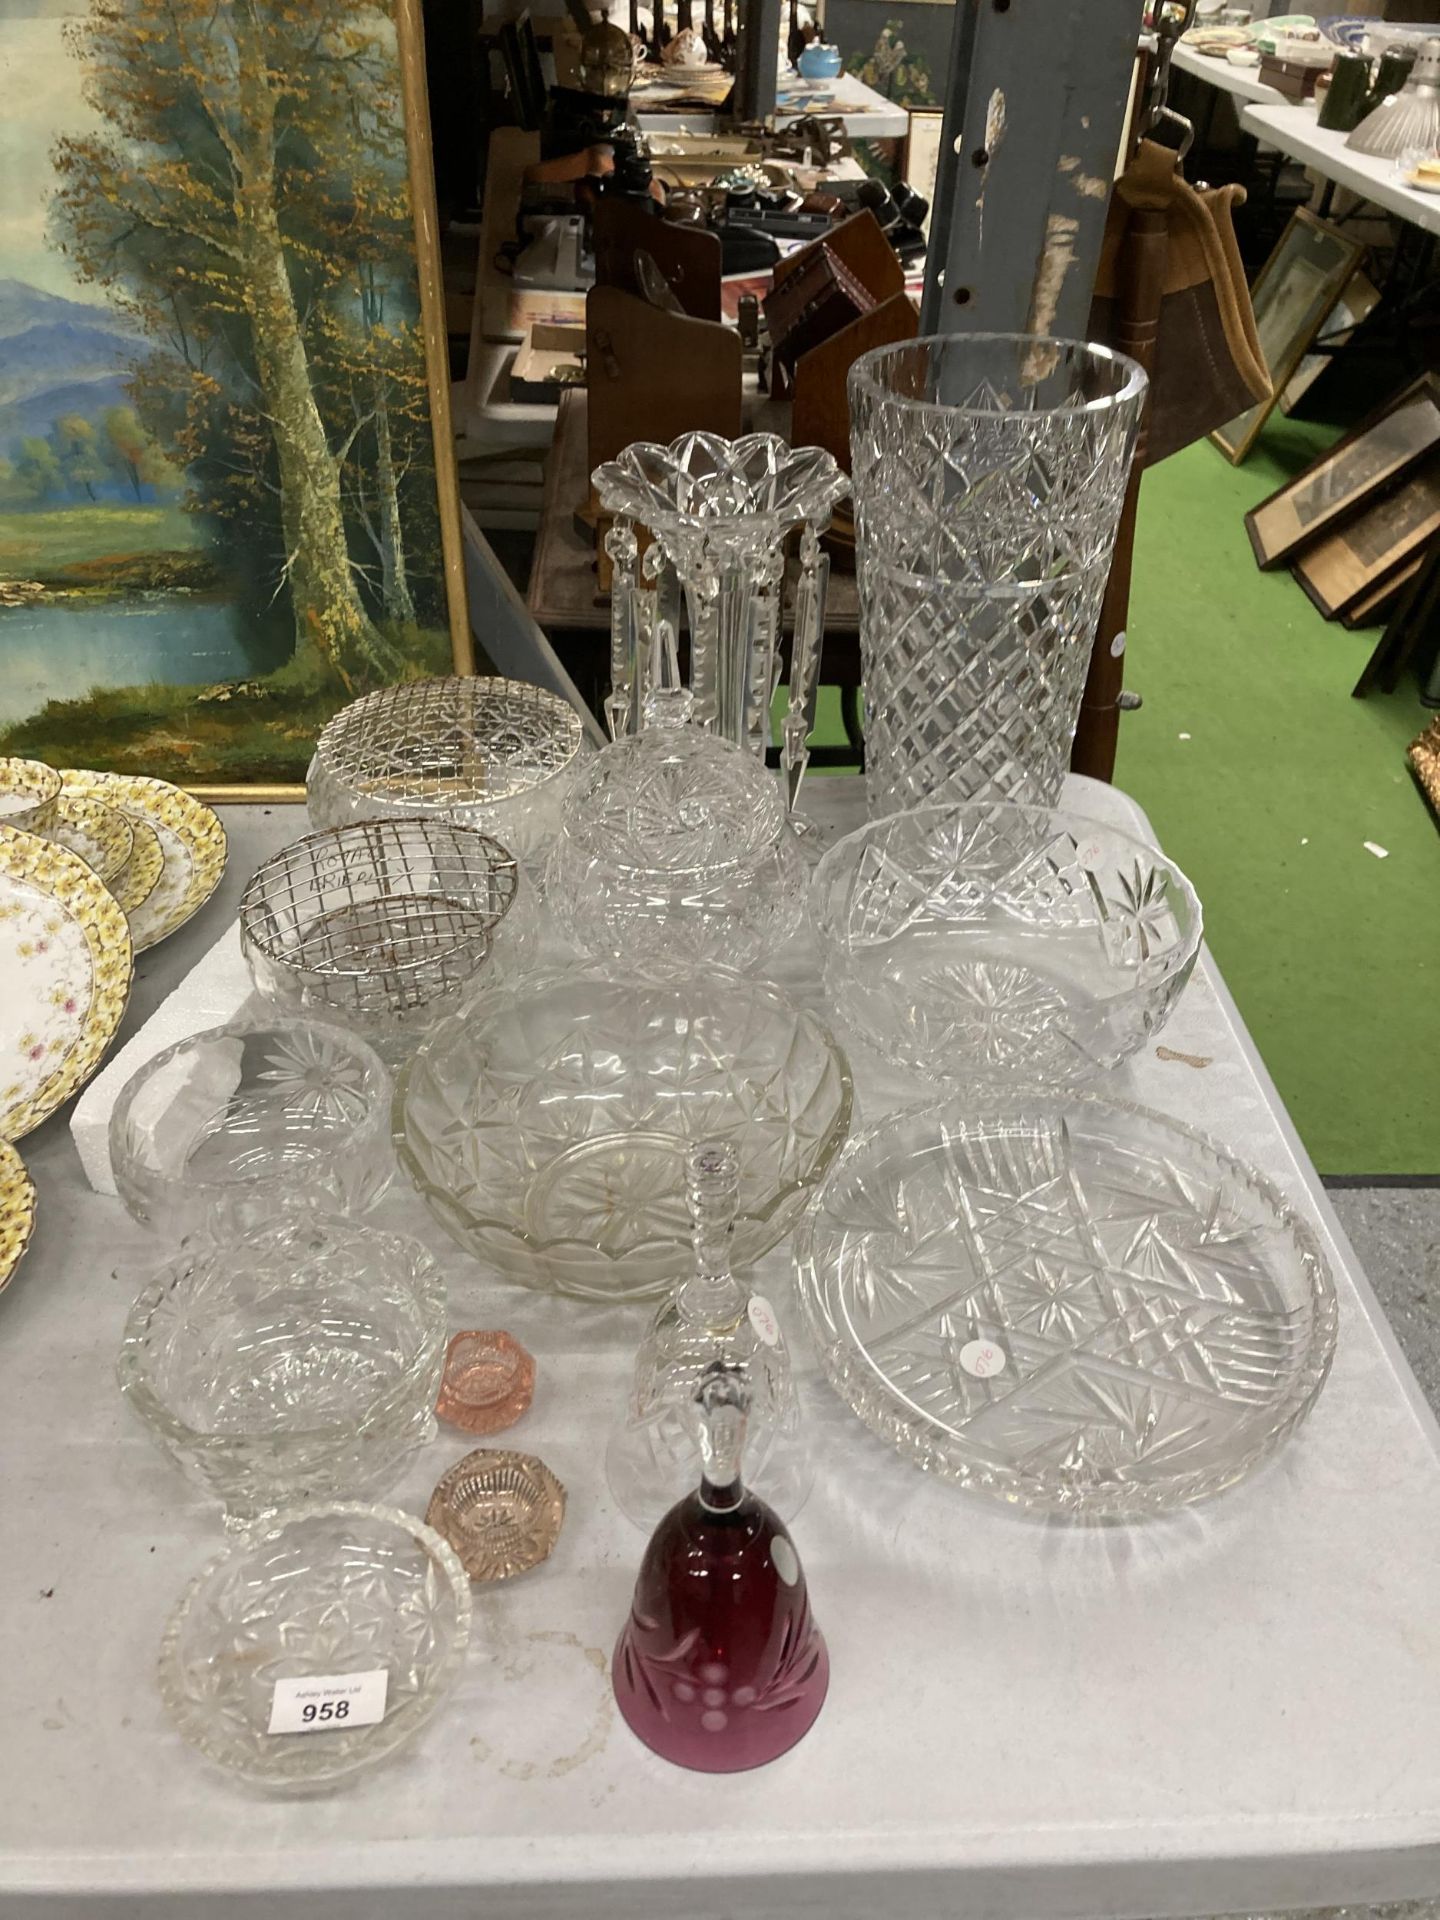 A LARGE QUANTITY OF GLASSWARE TO INCLUDE ROSE BOWLS, A CENTREPIECE VASE WITH CRYSTAL DROPLETS,